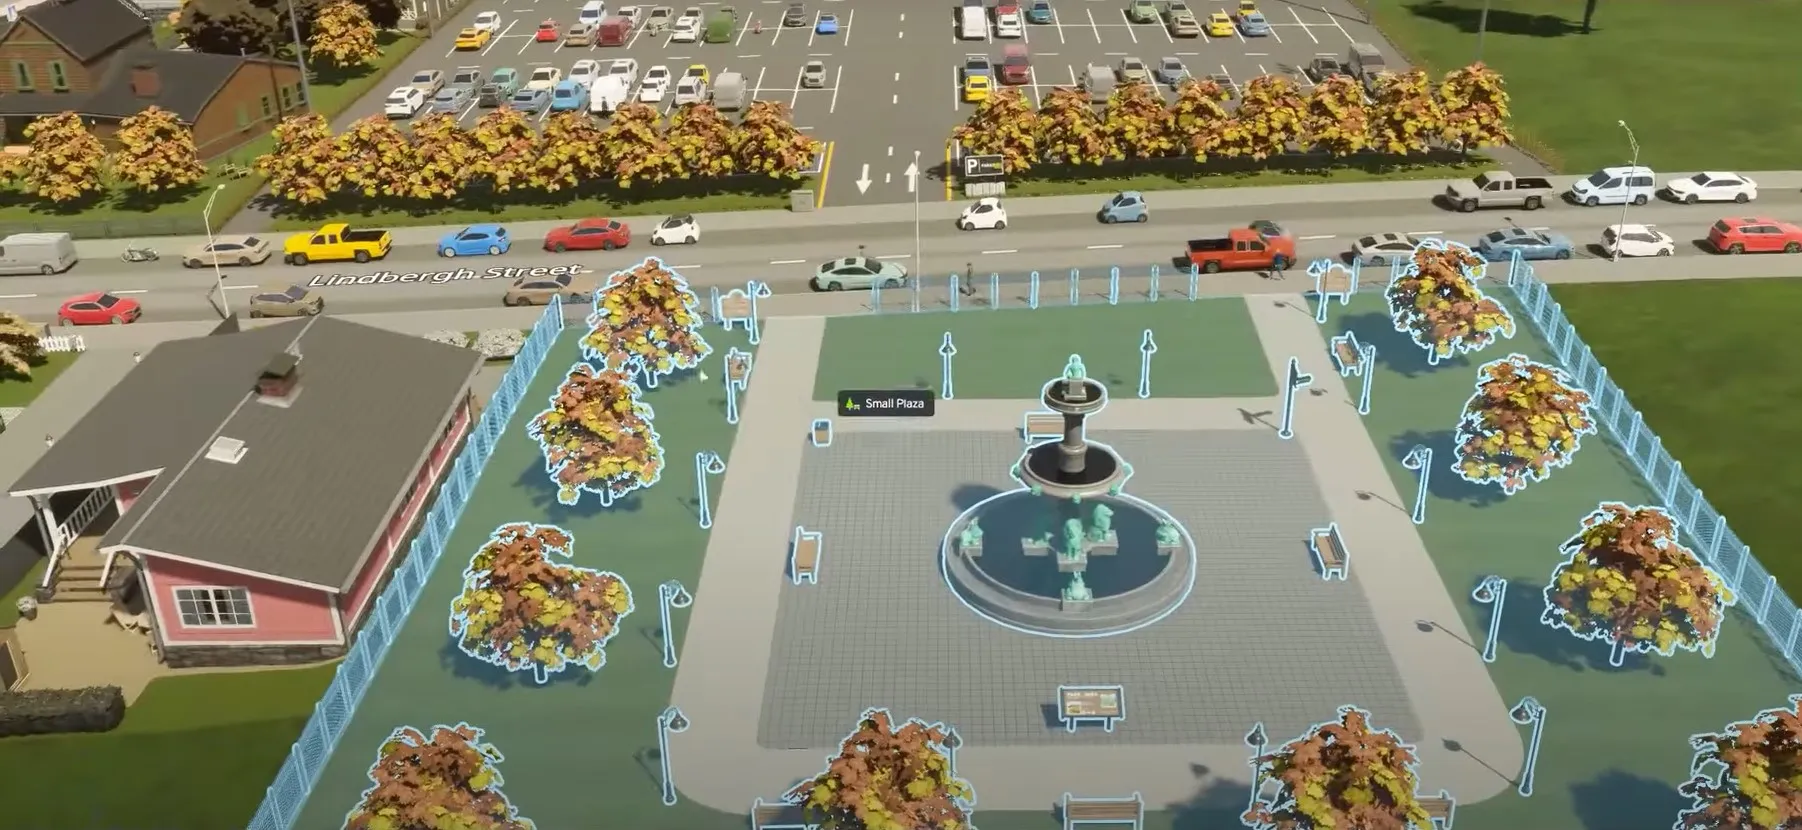 Small plaza from parks and recreation in Cities: Skylines 2